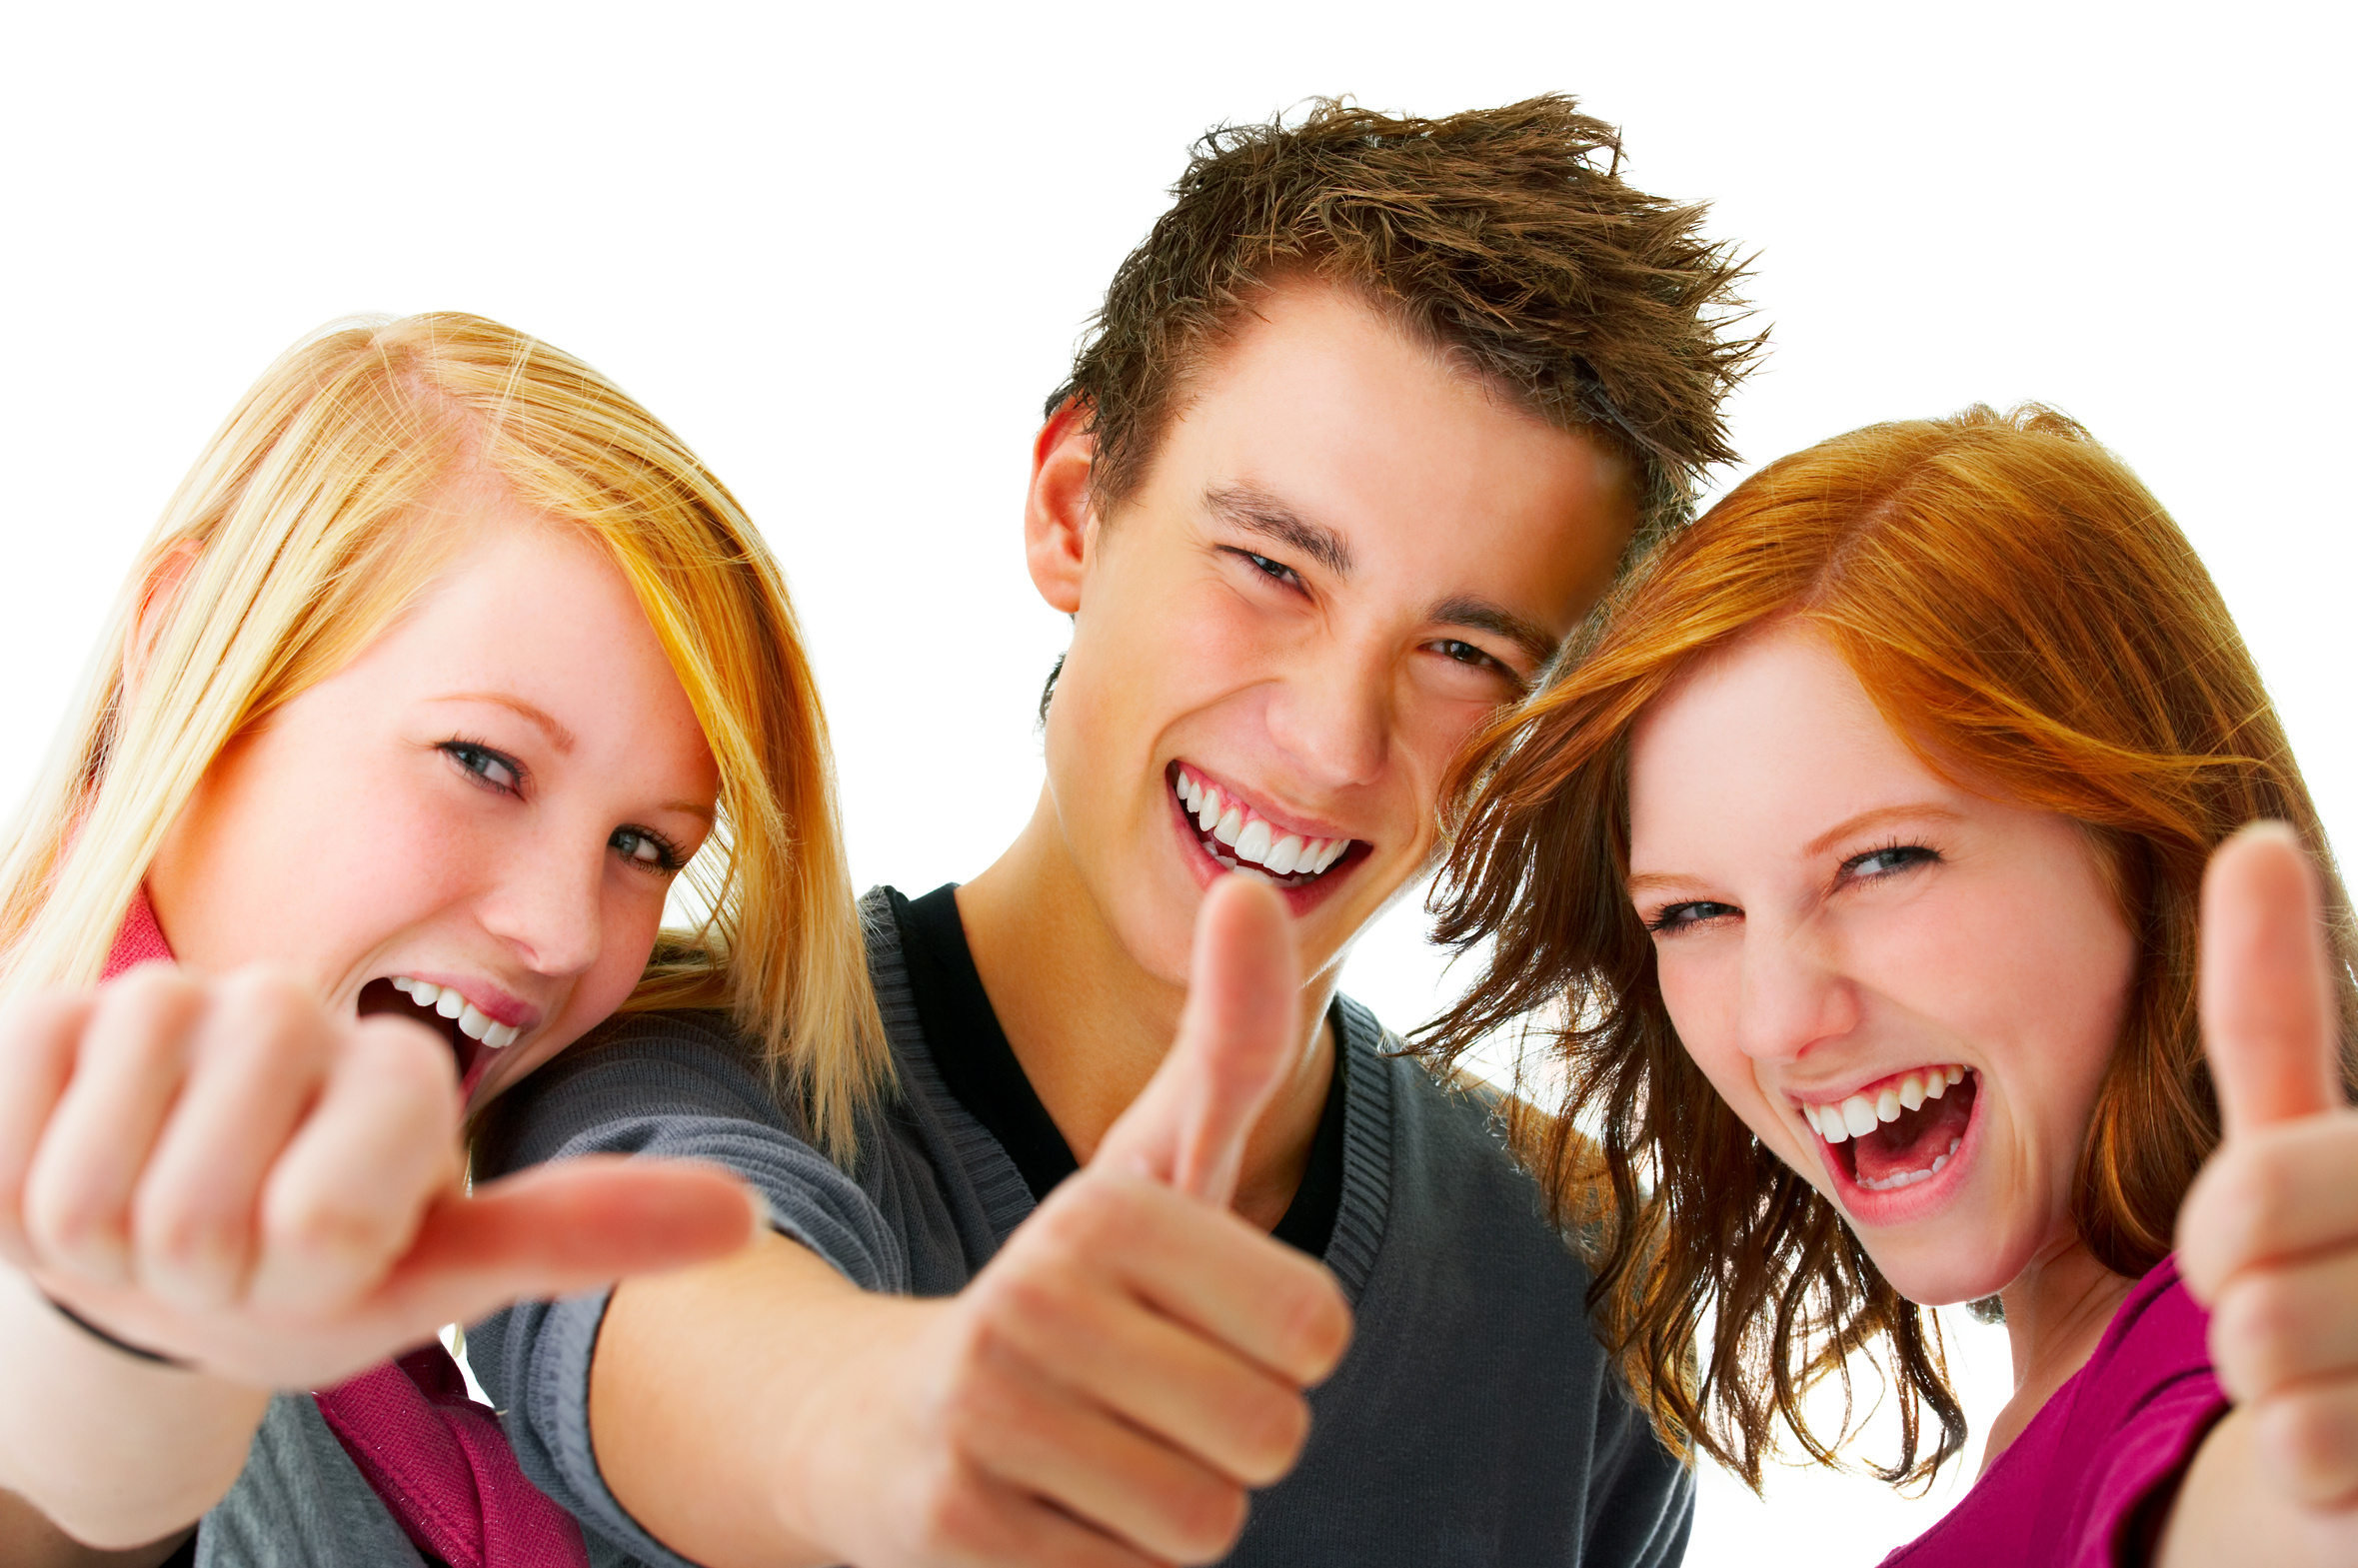 Portrait of three young teenagers laughing and giving the thumbs-up sign.